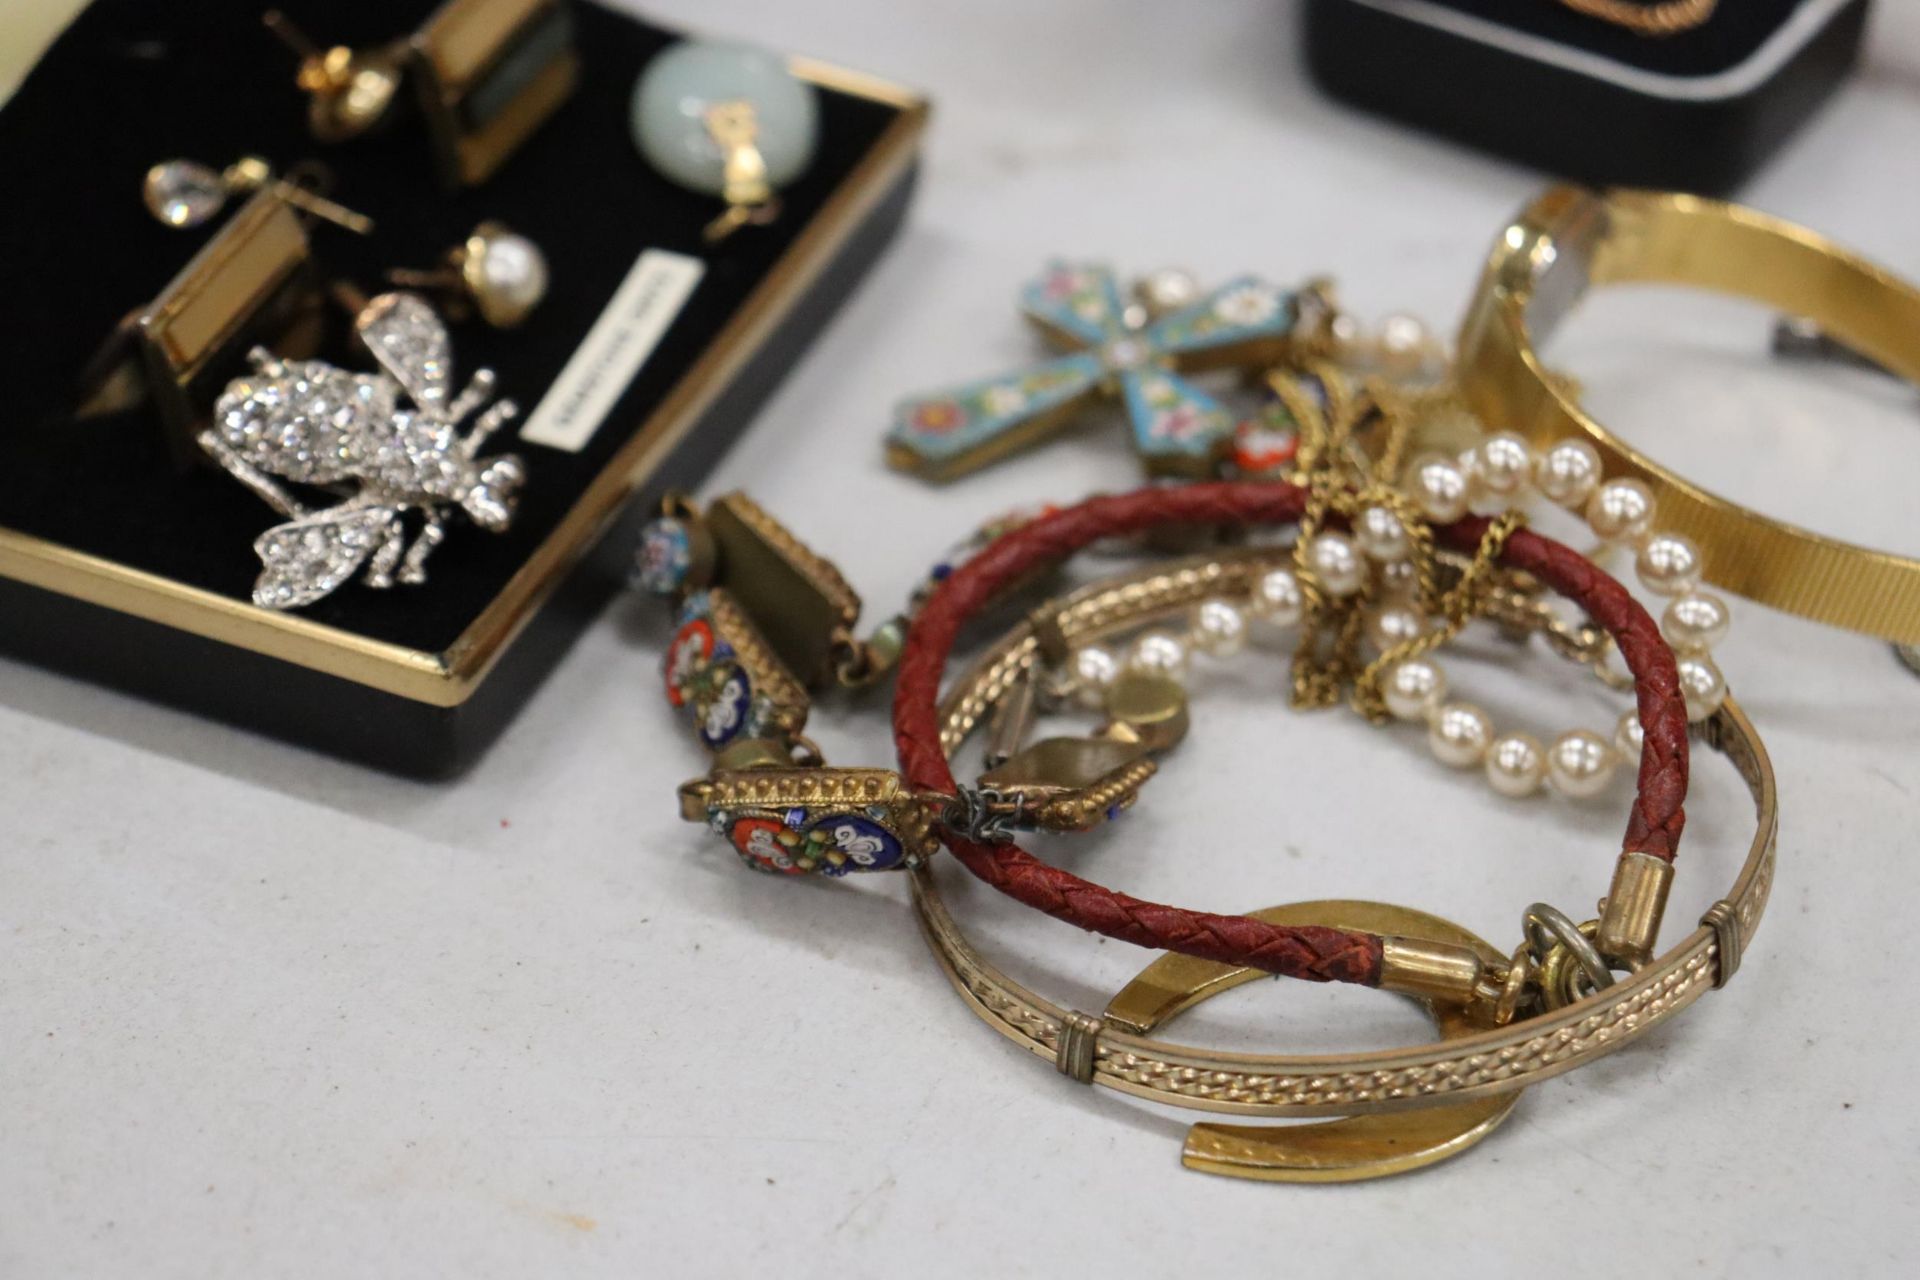 A QUANTITY OF COSTUME JEWELLERY TO INCLUDE BRACELETS, BOXED CUFFLINKS, A WATCH, PENKNIFE, ETC - Image 9 of 9